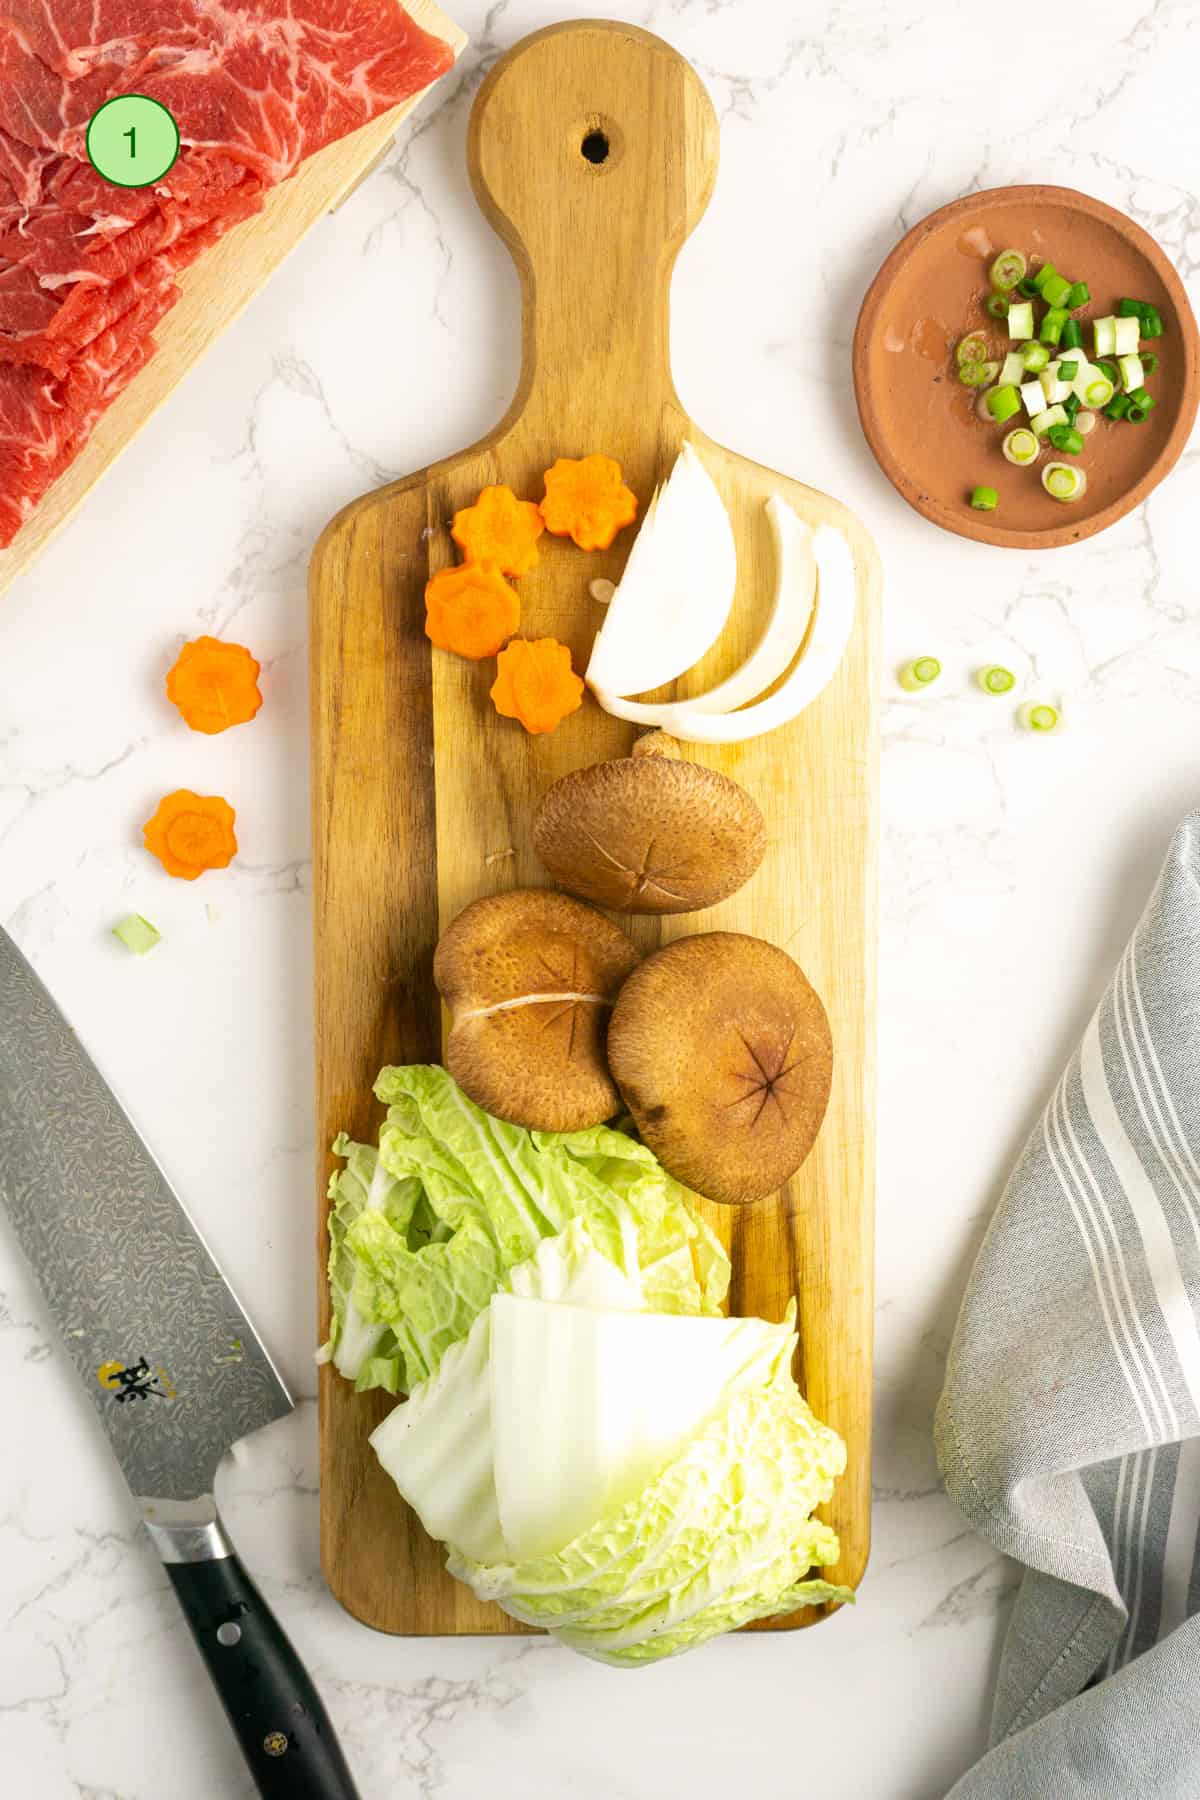 Preparing the vegetables on a wooden cutting board.